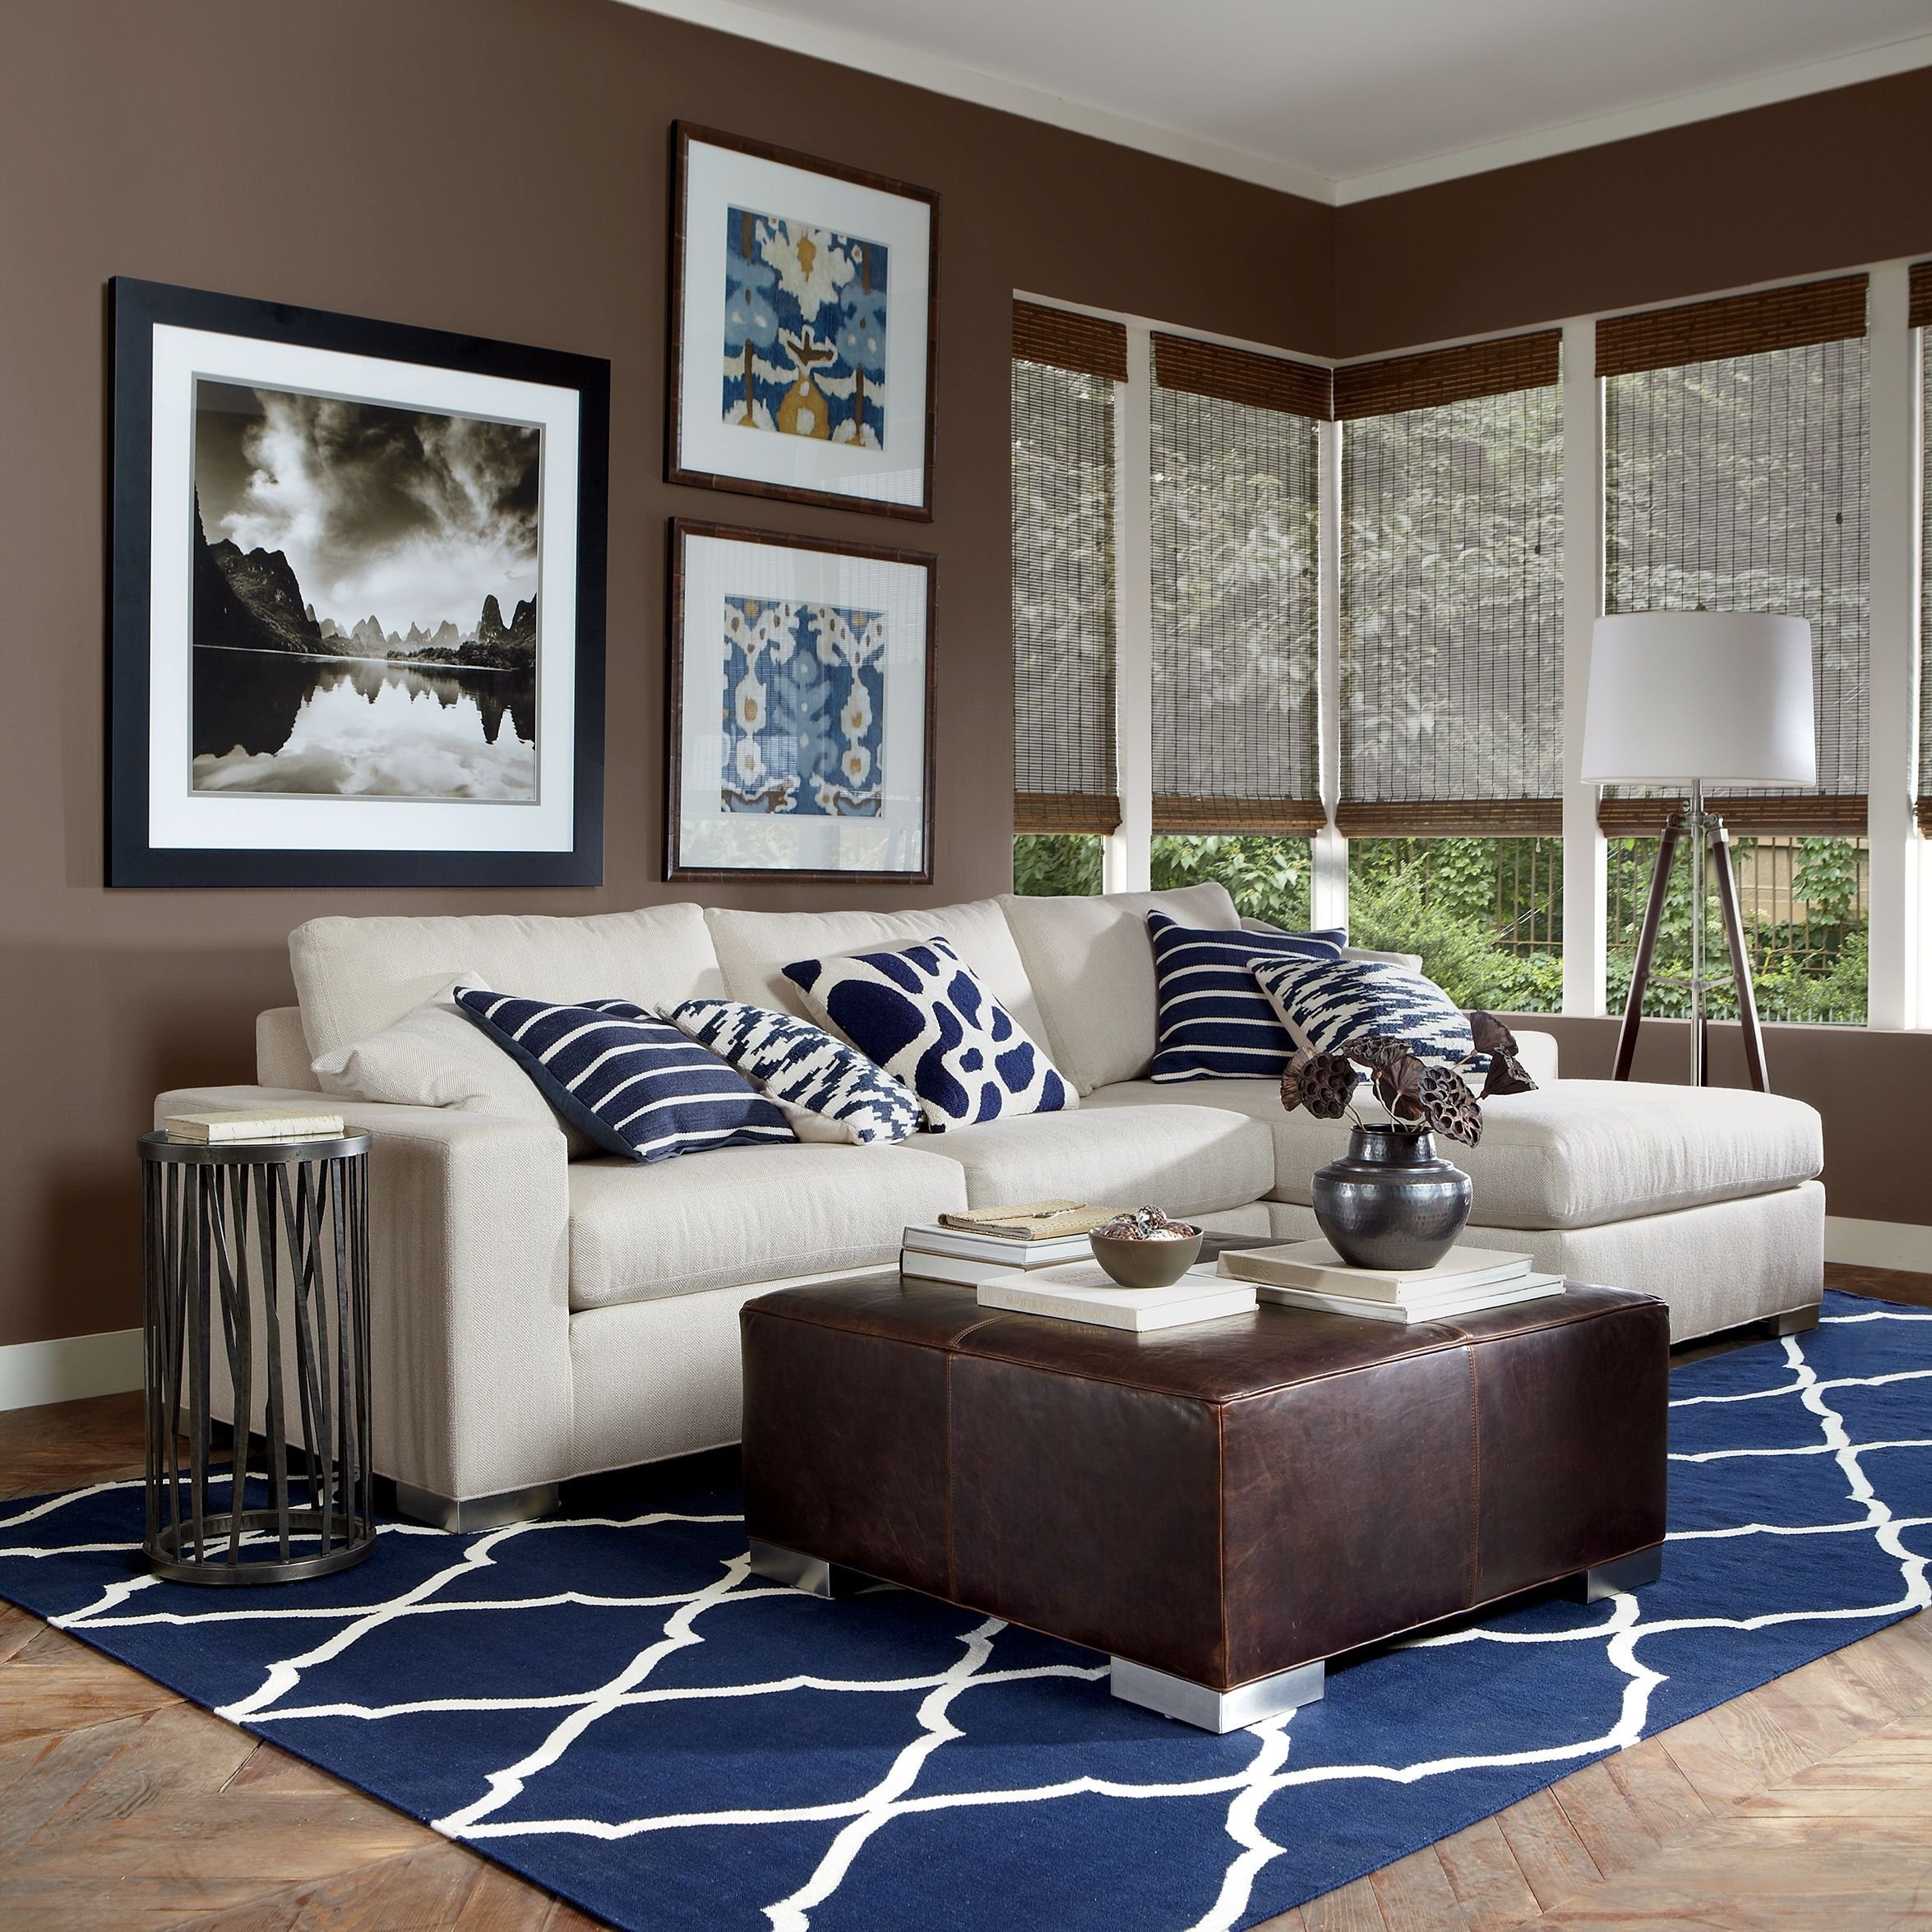 10 Fantastic Brown And Blue Living Room Ideas ethan allen living room blue living rooms ethan allen living 2022